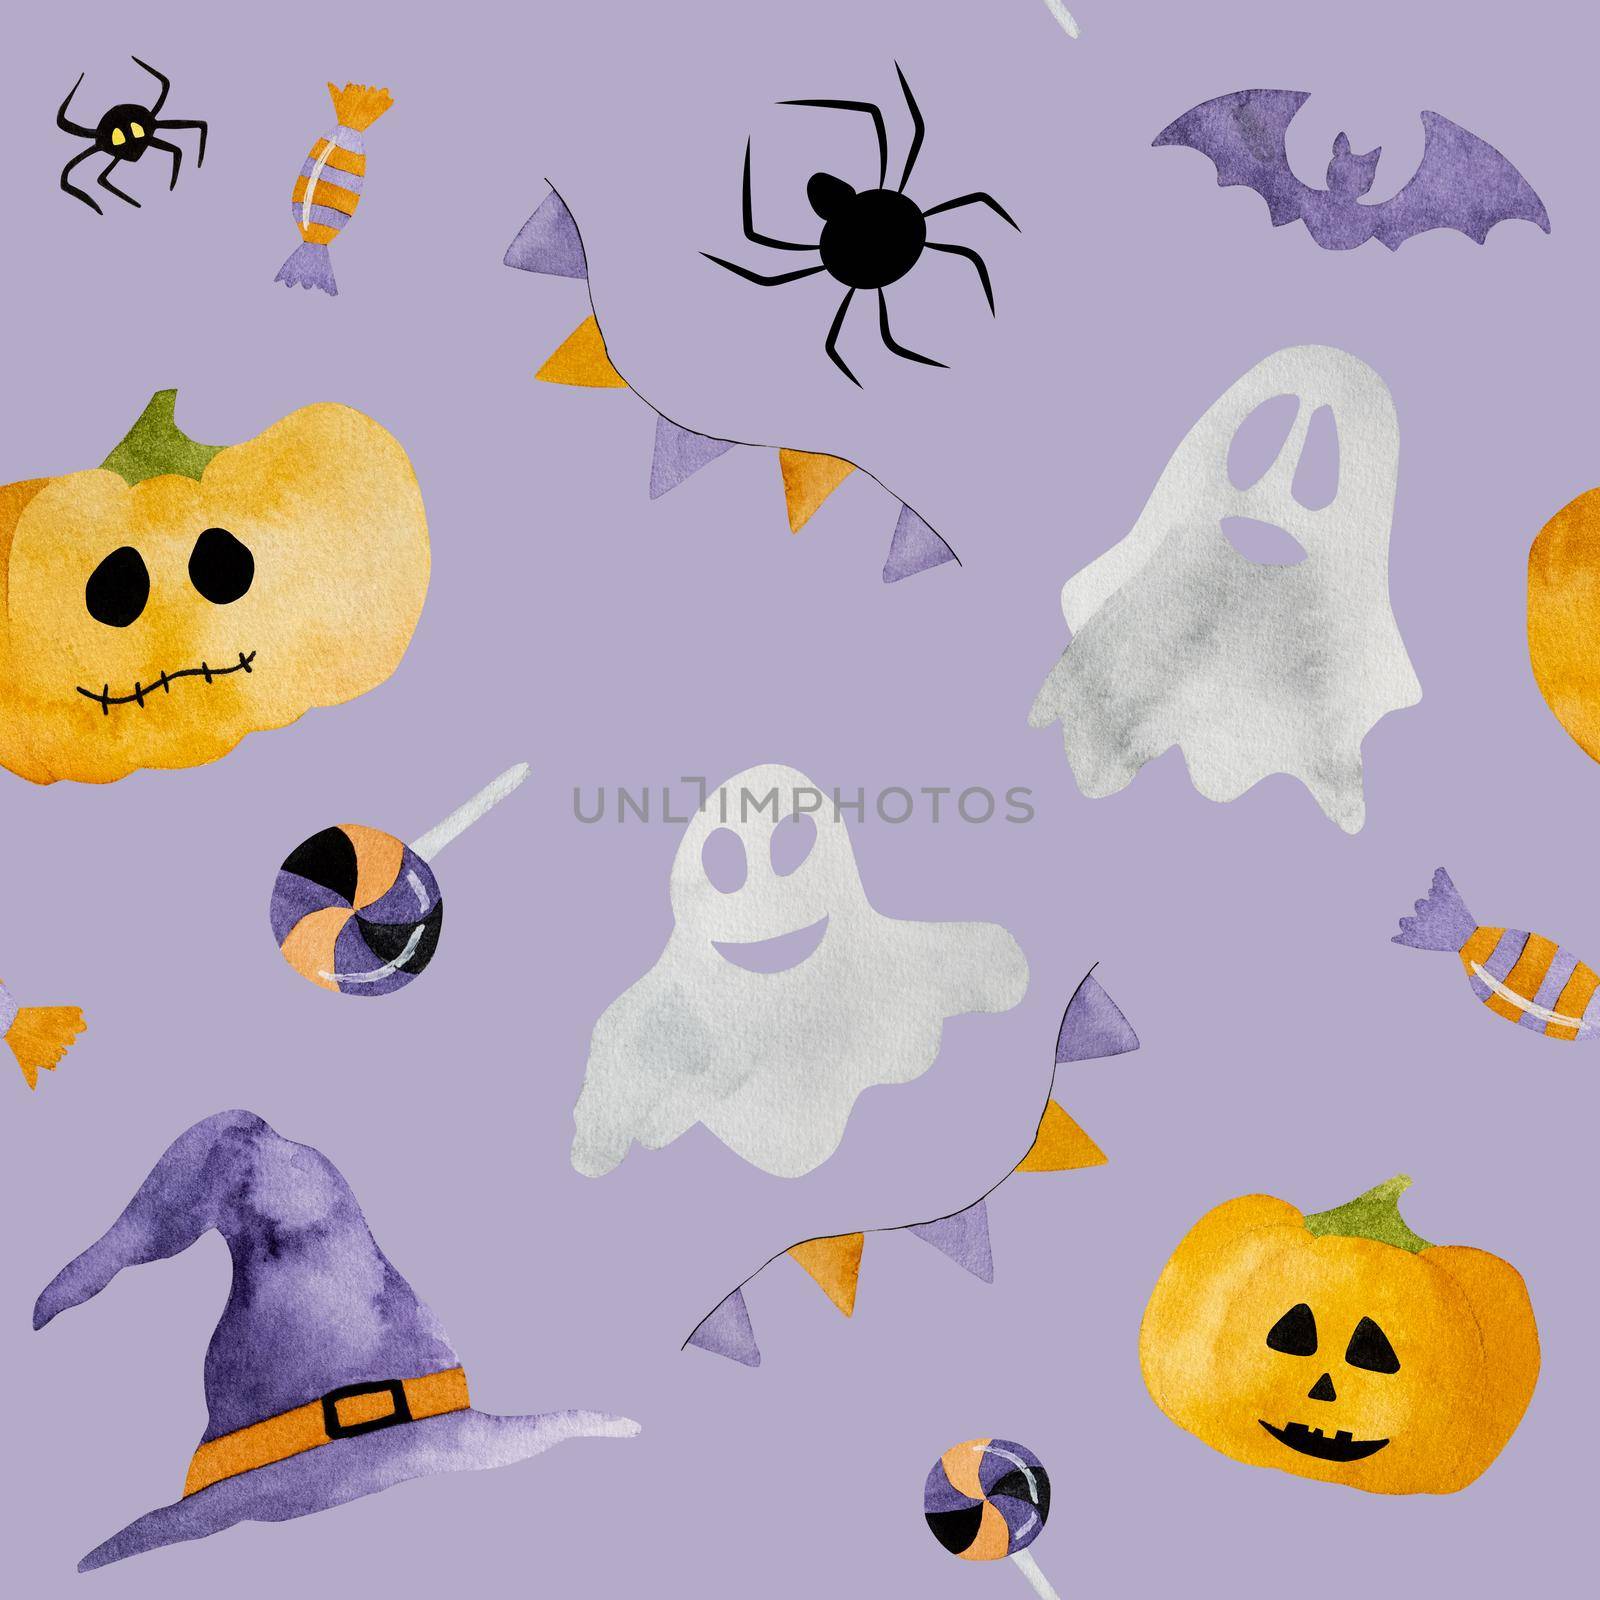 Halloween watercolor illustration wih ghosts, bats and pumpkins. Autumn october scary holiday decoration with spiders and witch hats